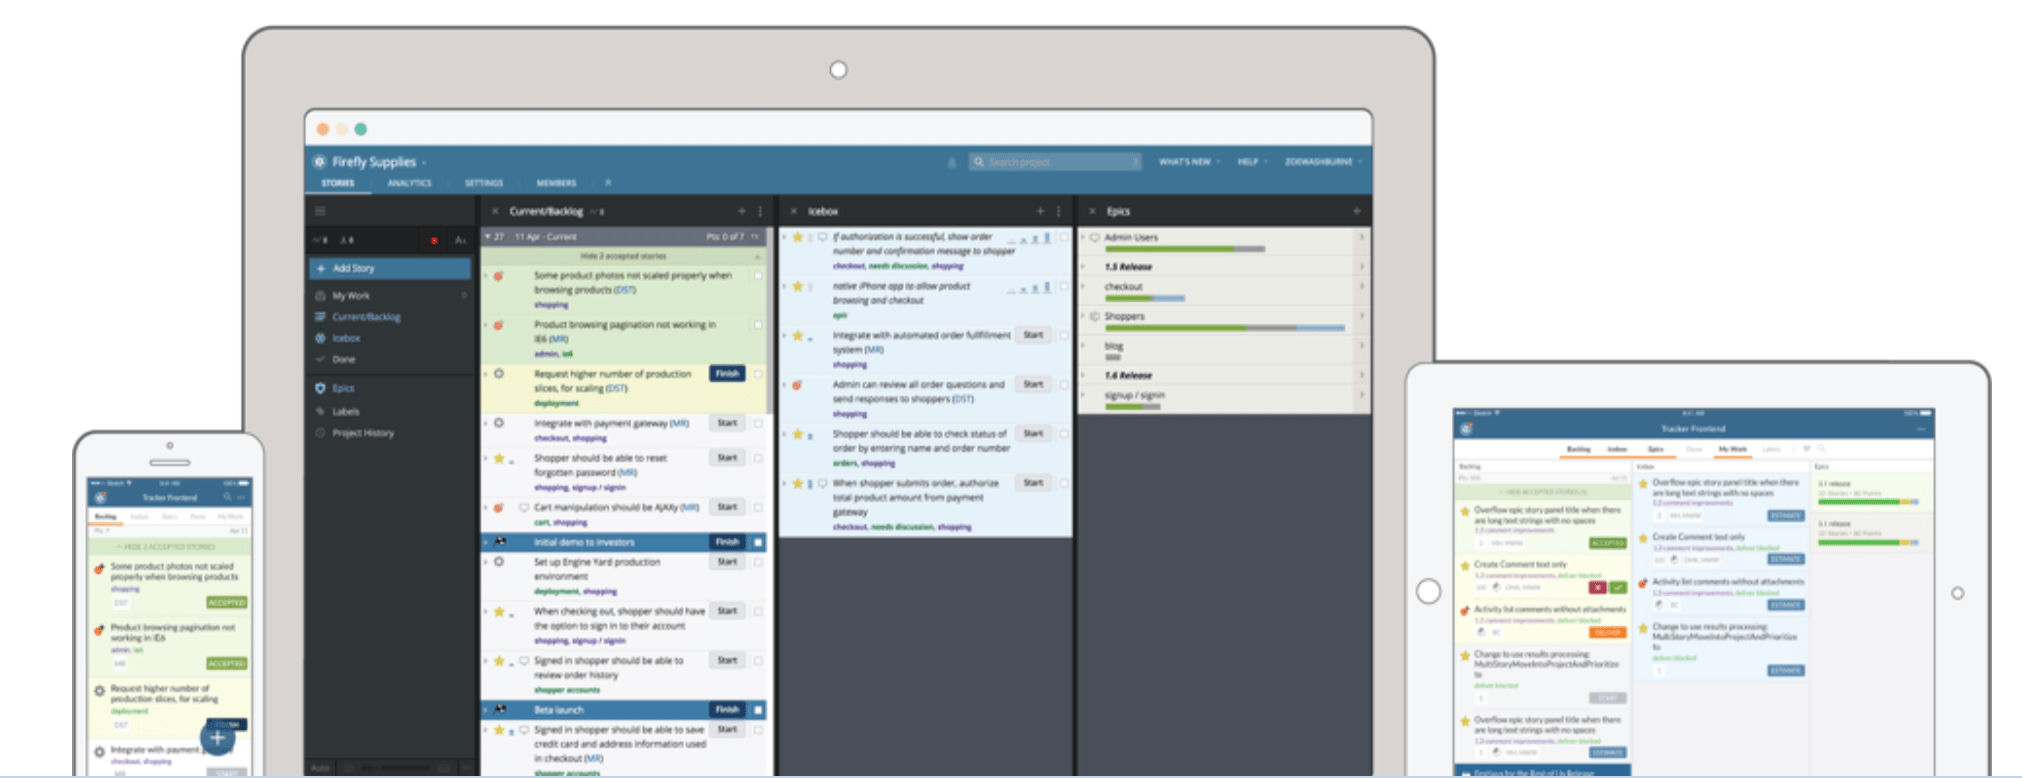 Pivotal Tracker agile project management tool project workflow on multiple devices example.